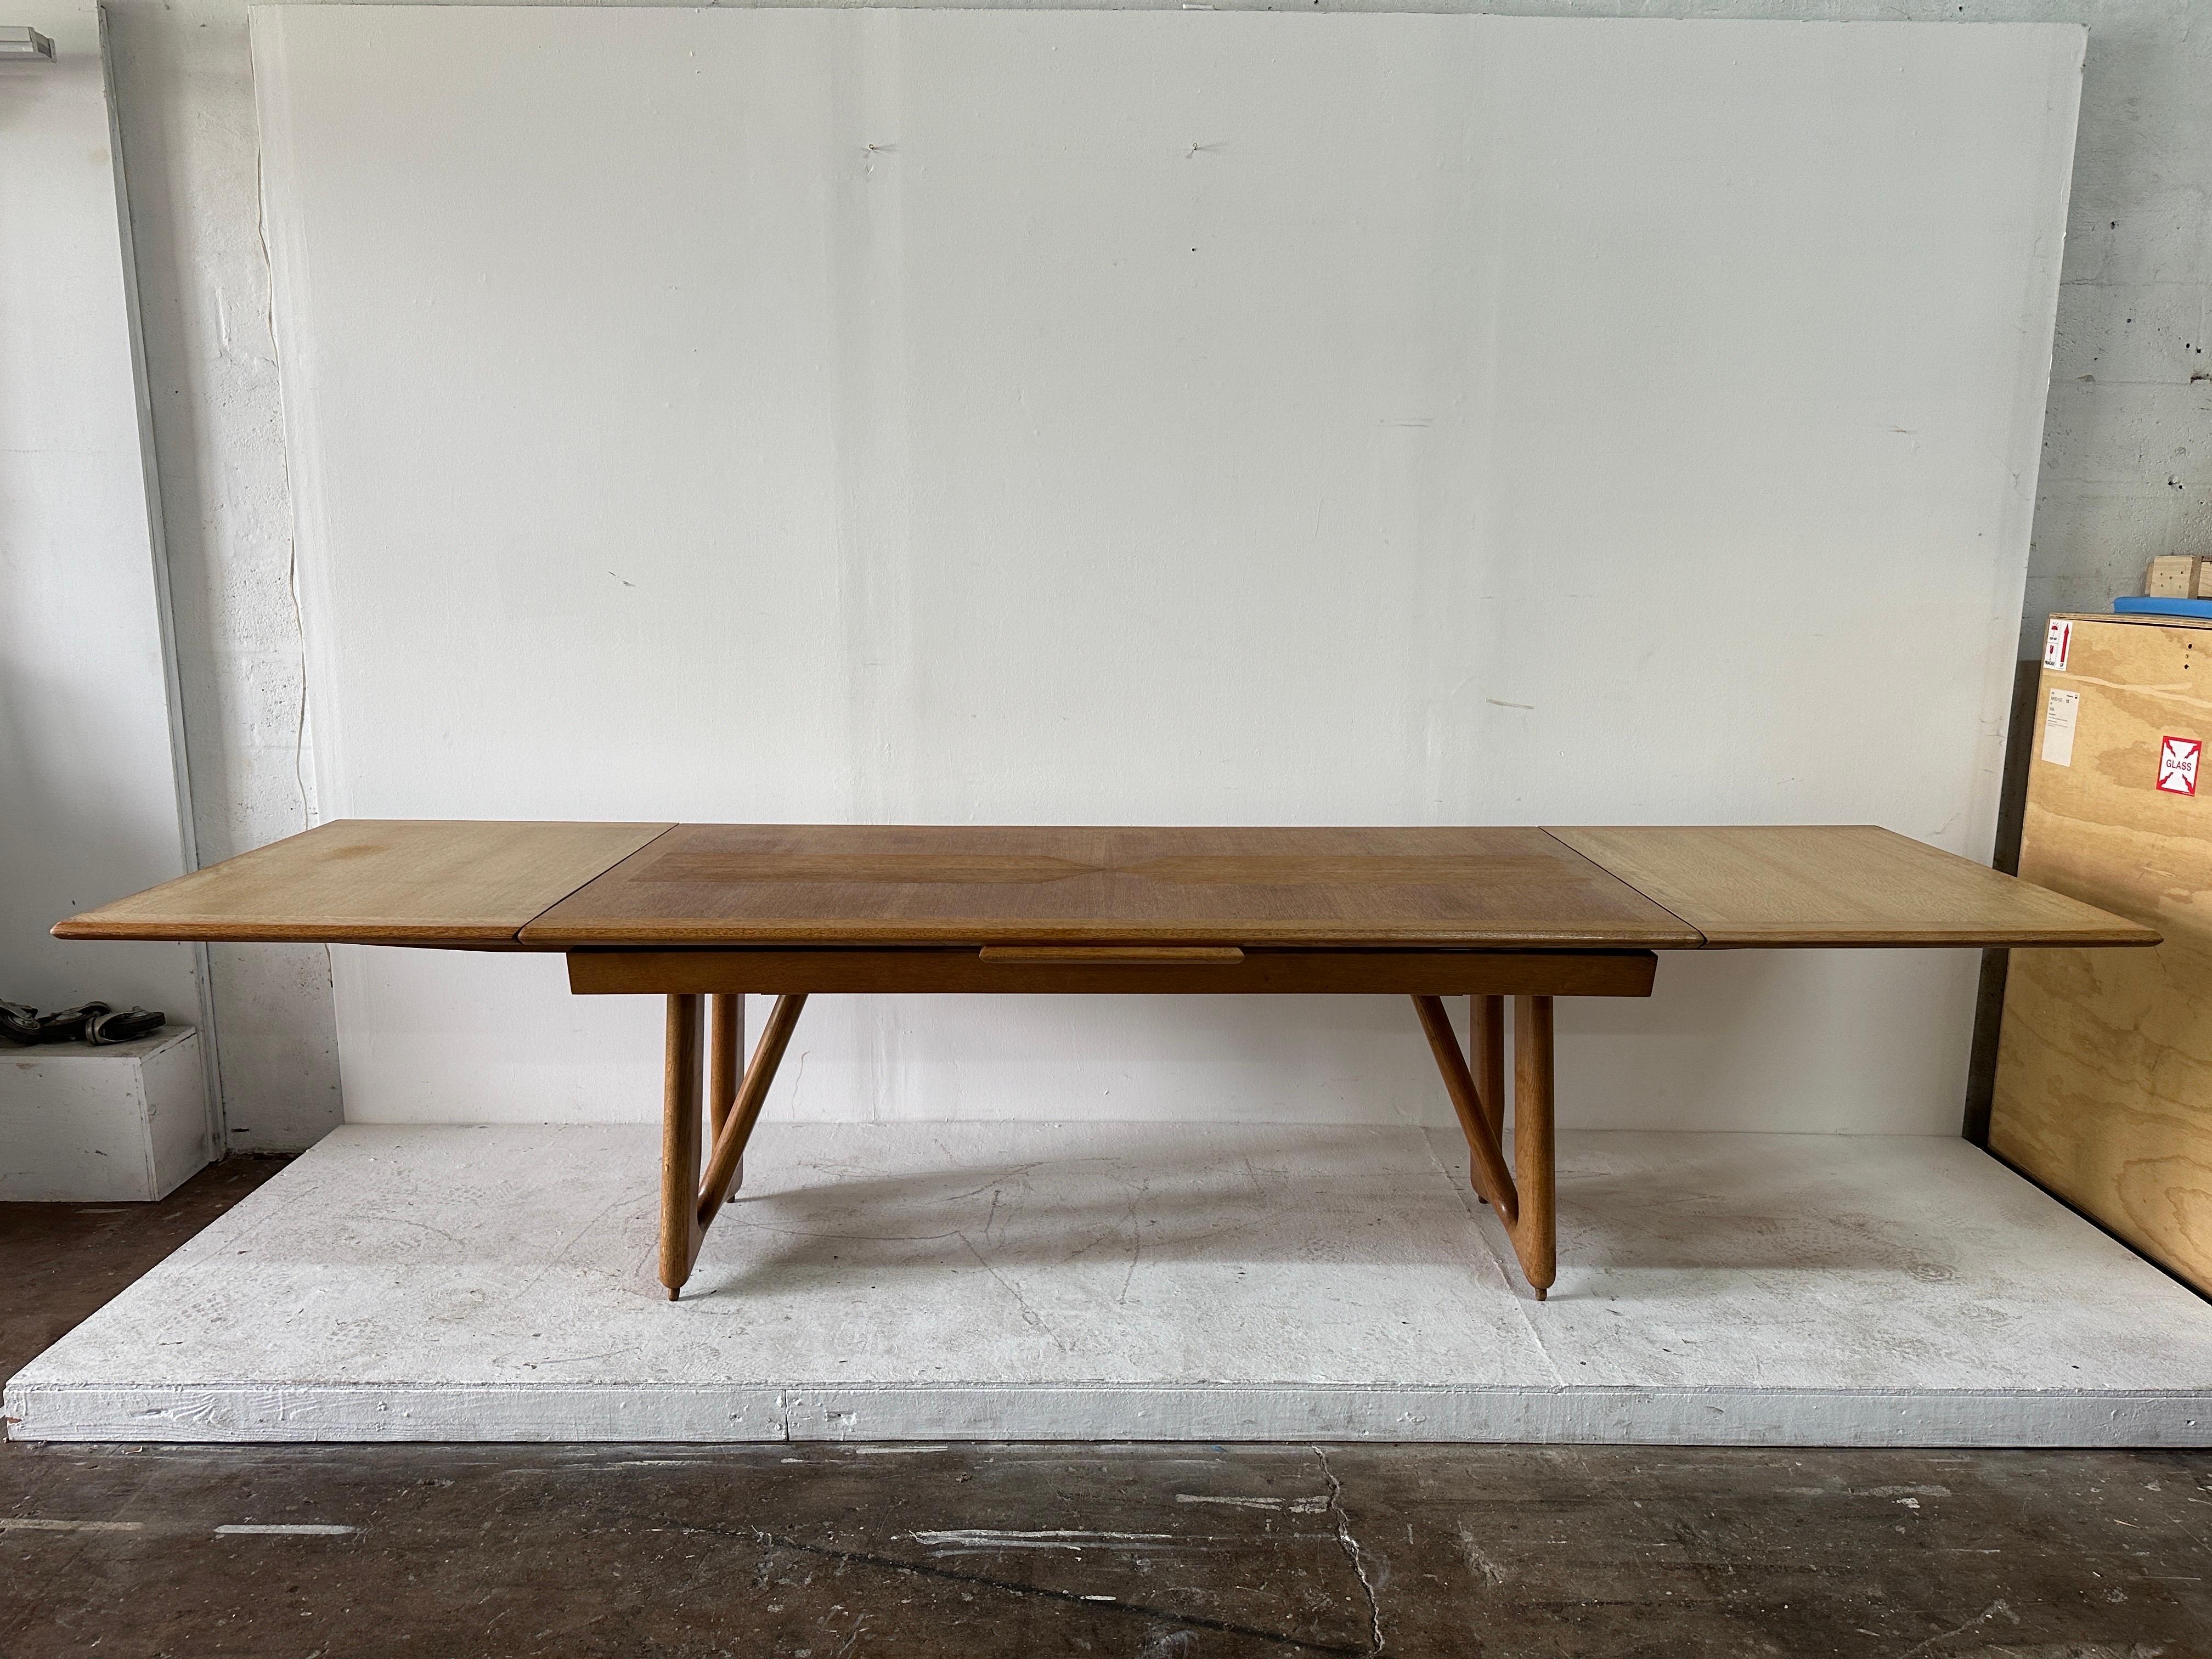 Guillerme et Chambron for Votre Maison, dining table, oak, France, 1965.  Dimensions of table with FULL extension is 125.5 inches. This extendable dining table in solid oak by French designers Guillerme and Chambron. This elegant table shows